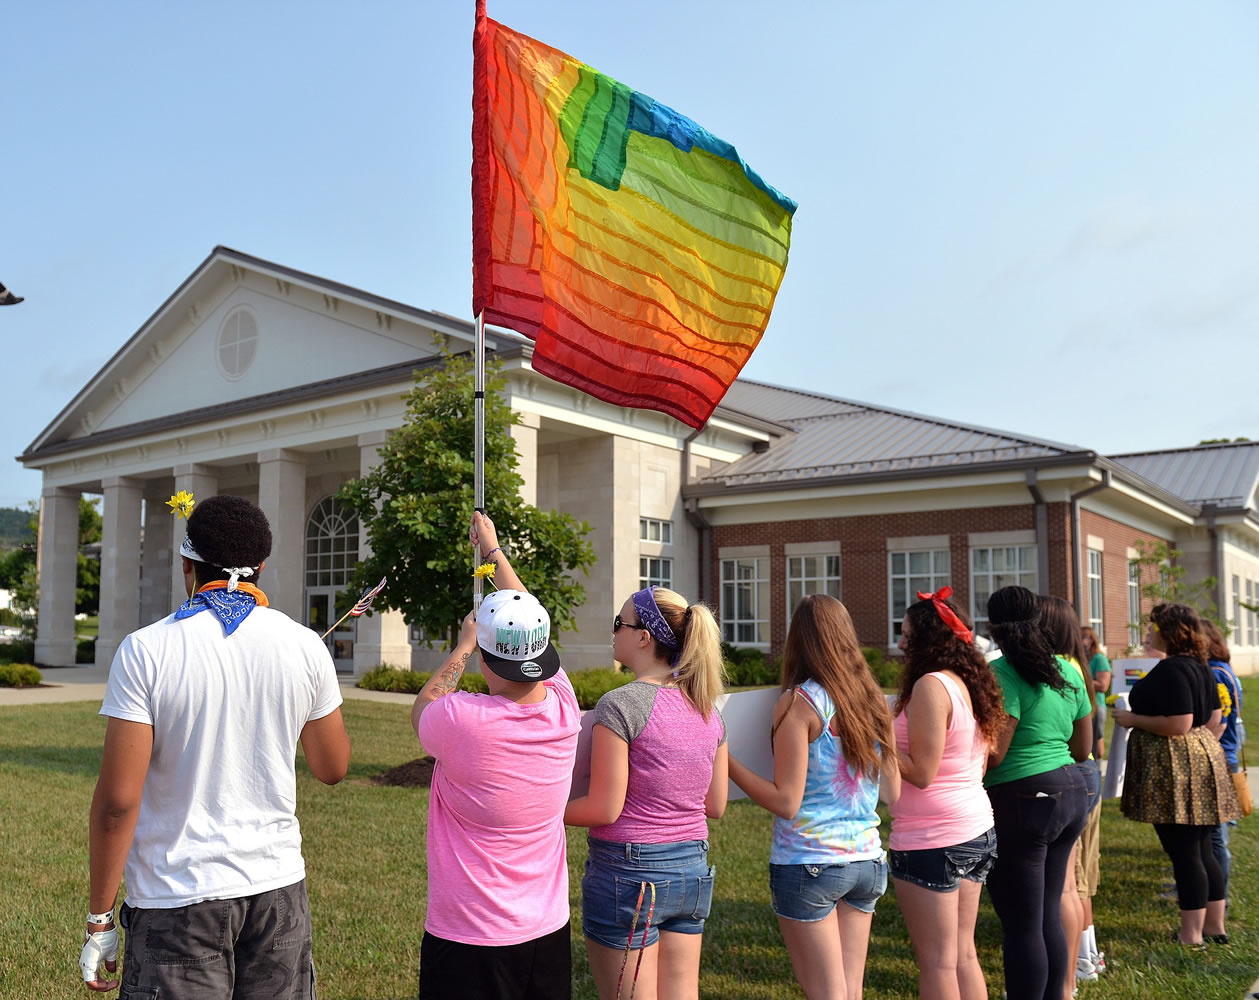 Protesters wave a rainbow flag Tuesday on the front lawn of the Rowan County Judicial Center in Morehead, Ky.